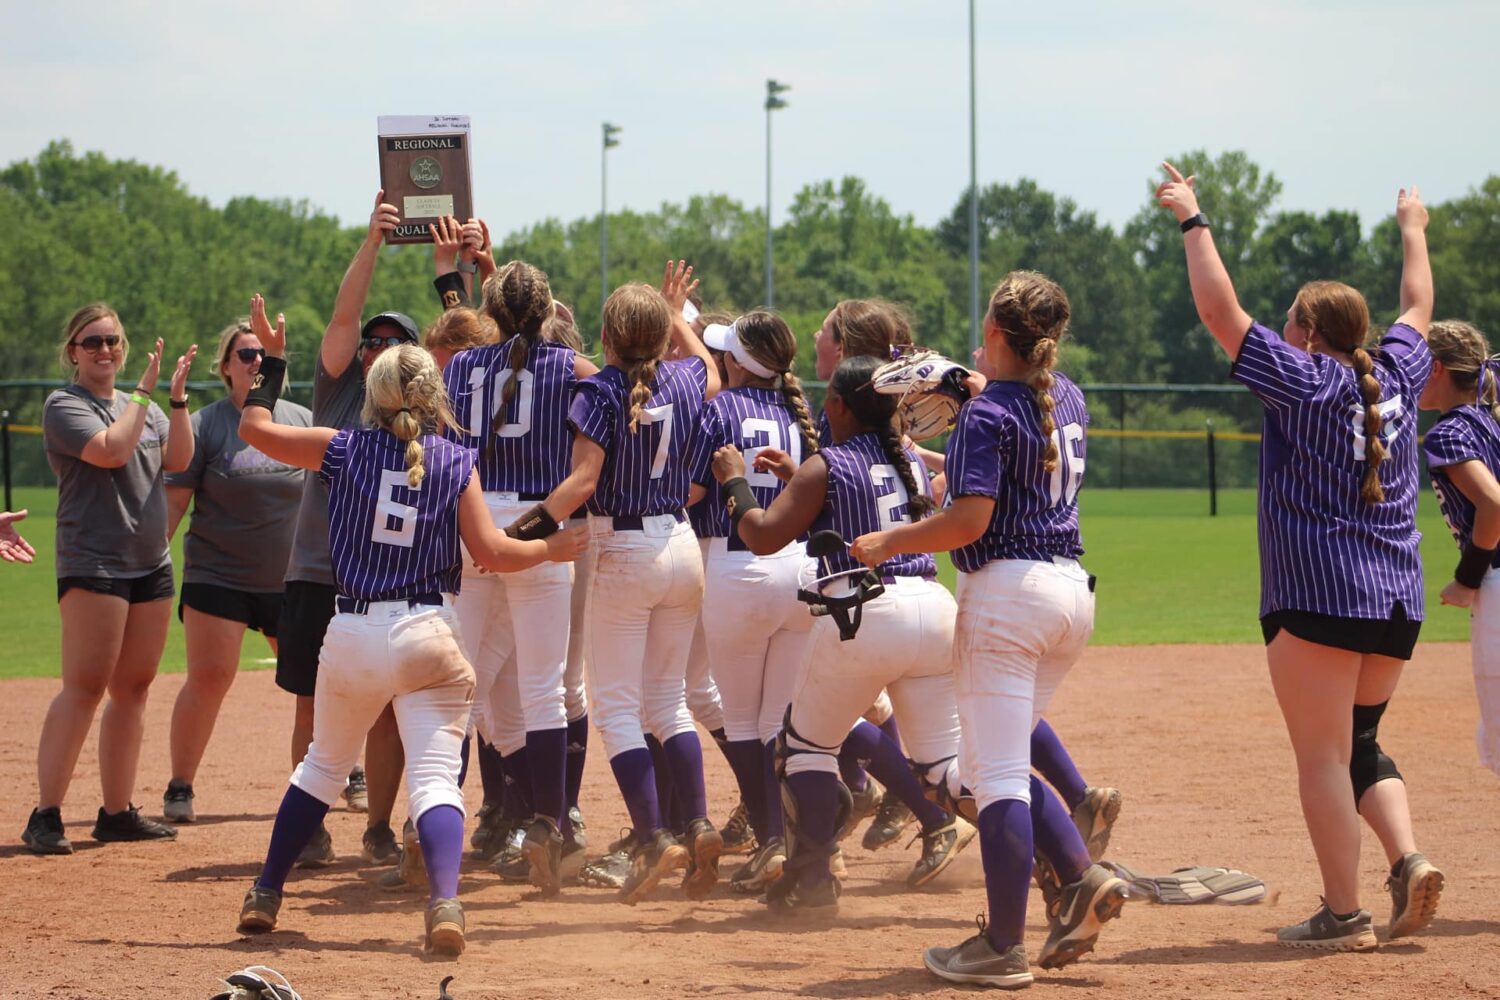 The Danville Lady Hawks mob their coach, Christy Ferguson, after winning the 3A North Regional after a 7-5 over Mars Hill. Photo by Bridgette Guest